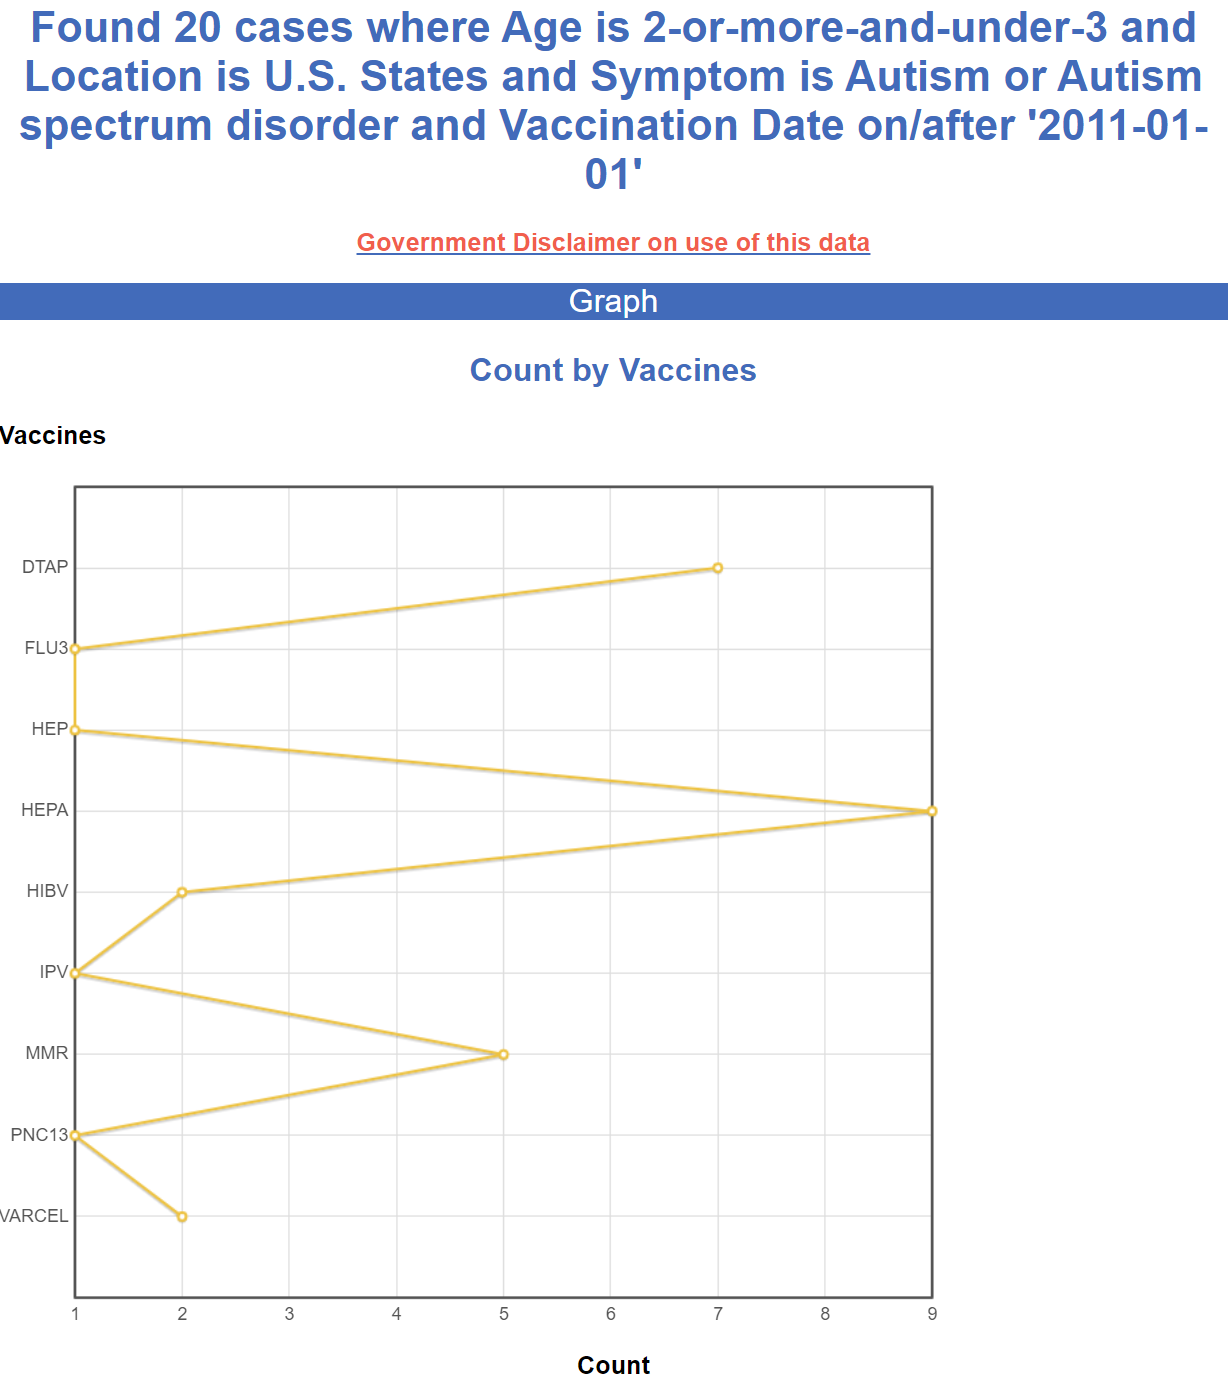 VAERS data shows that vaccines cause autism Https%3A%2F%2Fsubstack-post-media.s3.amazonaws.com%2Fpublic%2Fimages%2F855d5a4a-b6a7-4374-82db-9cd3adc6cced_1228x1394